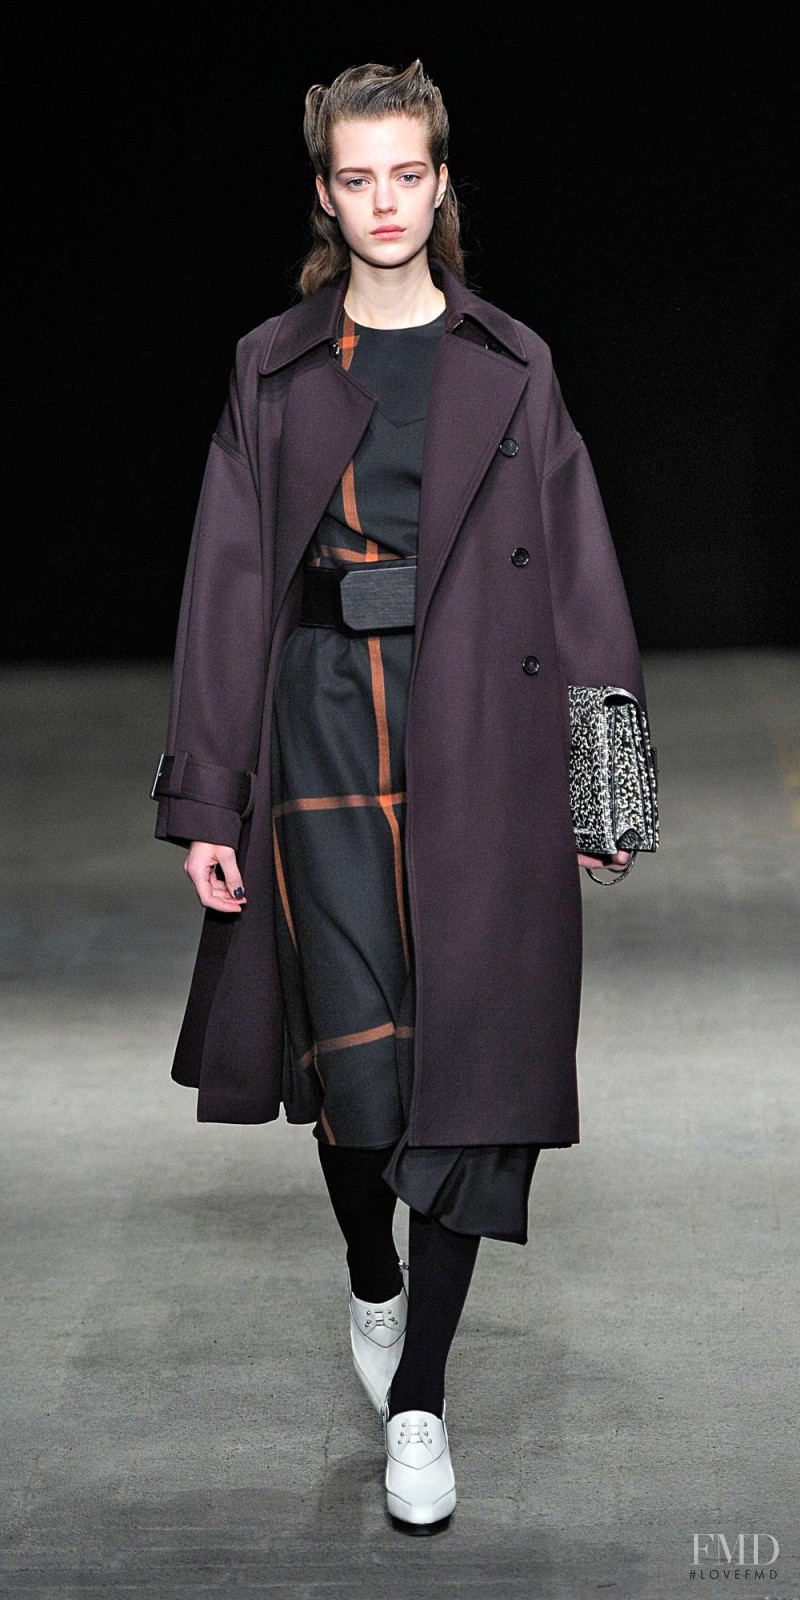 Esther Heesch featured in  the 3.1 Phillip Lim fashion show for Autumn/Winter 2014